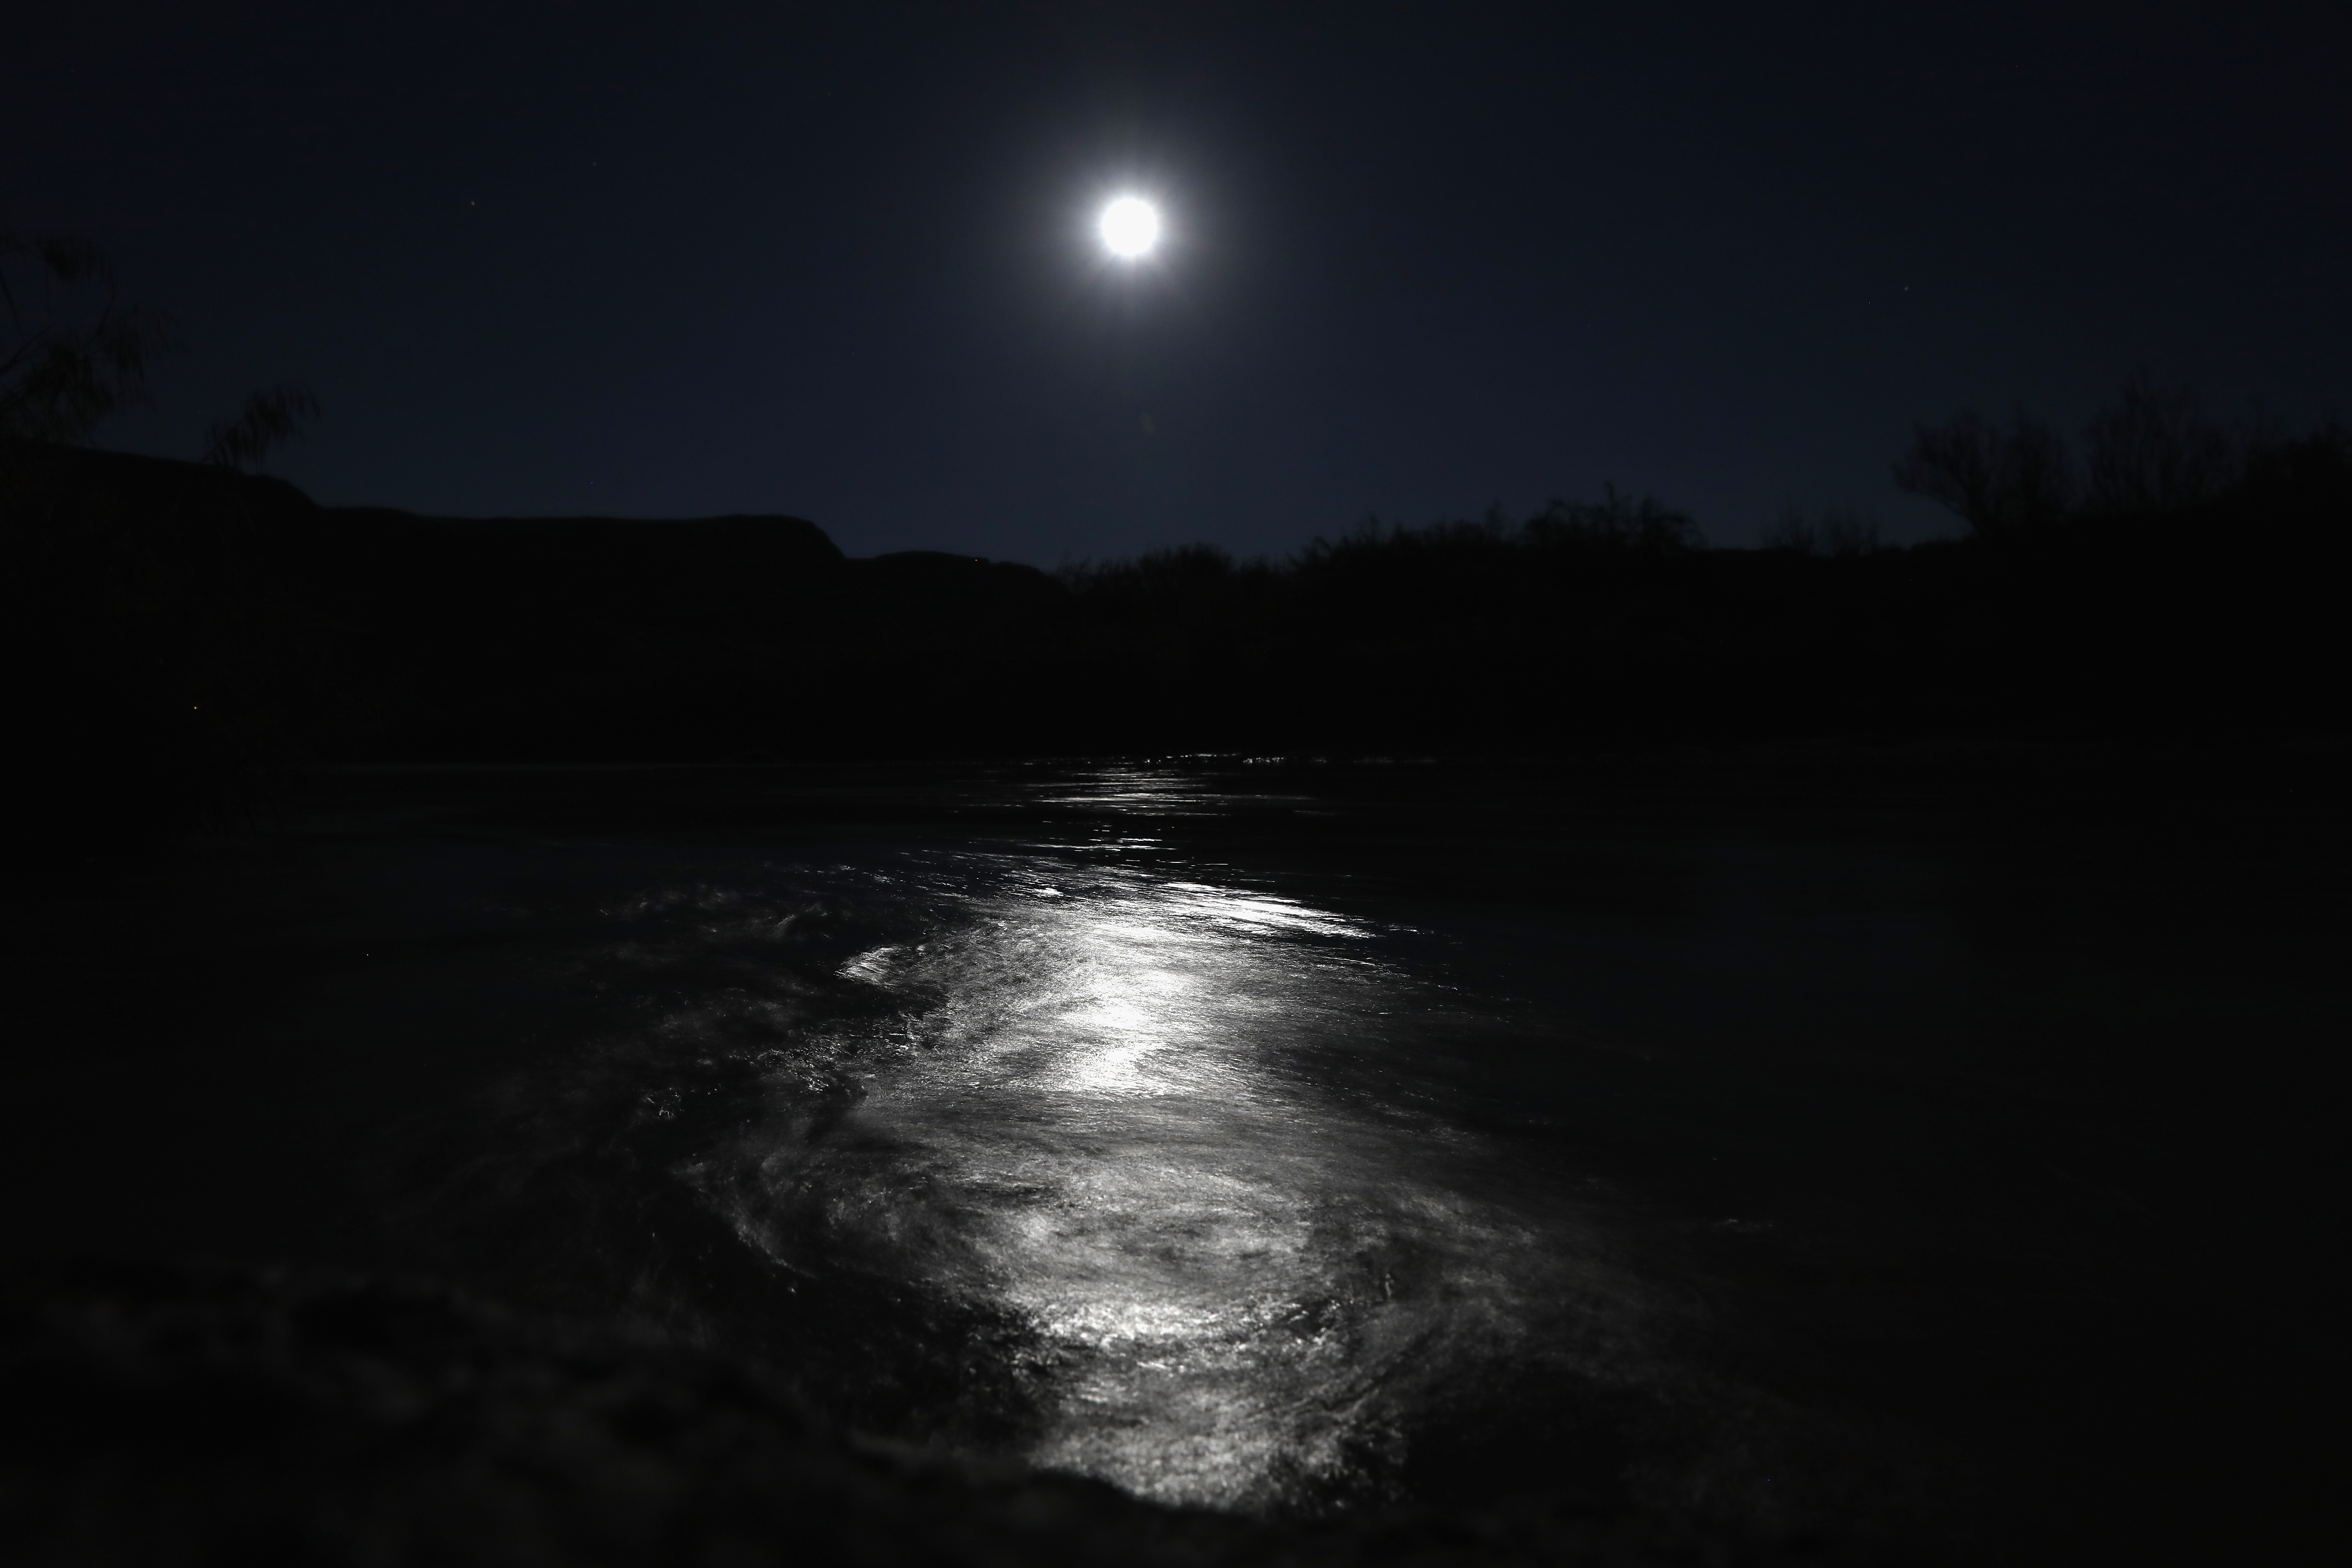 The moon rises over the swirling current of the Rio Grande  on Oct. 15, 2016 in the Big Bend region of West Texas near Lajitas, Texas.